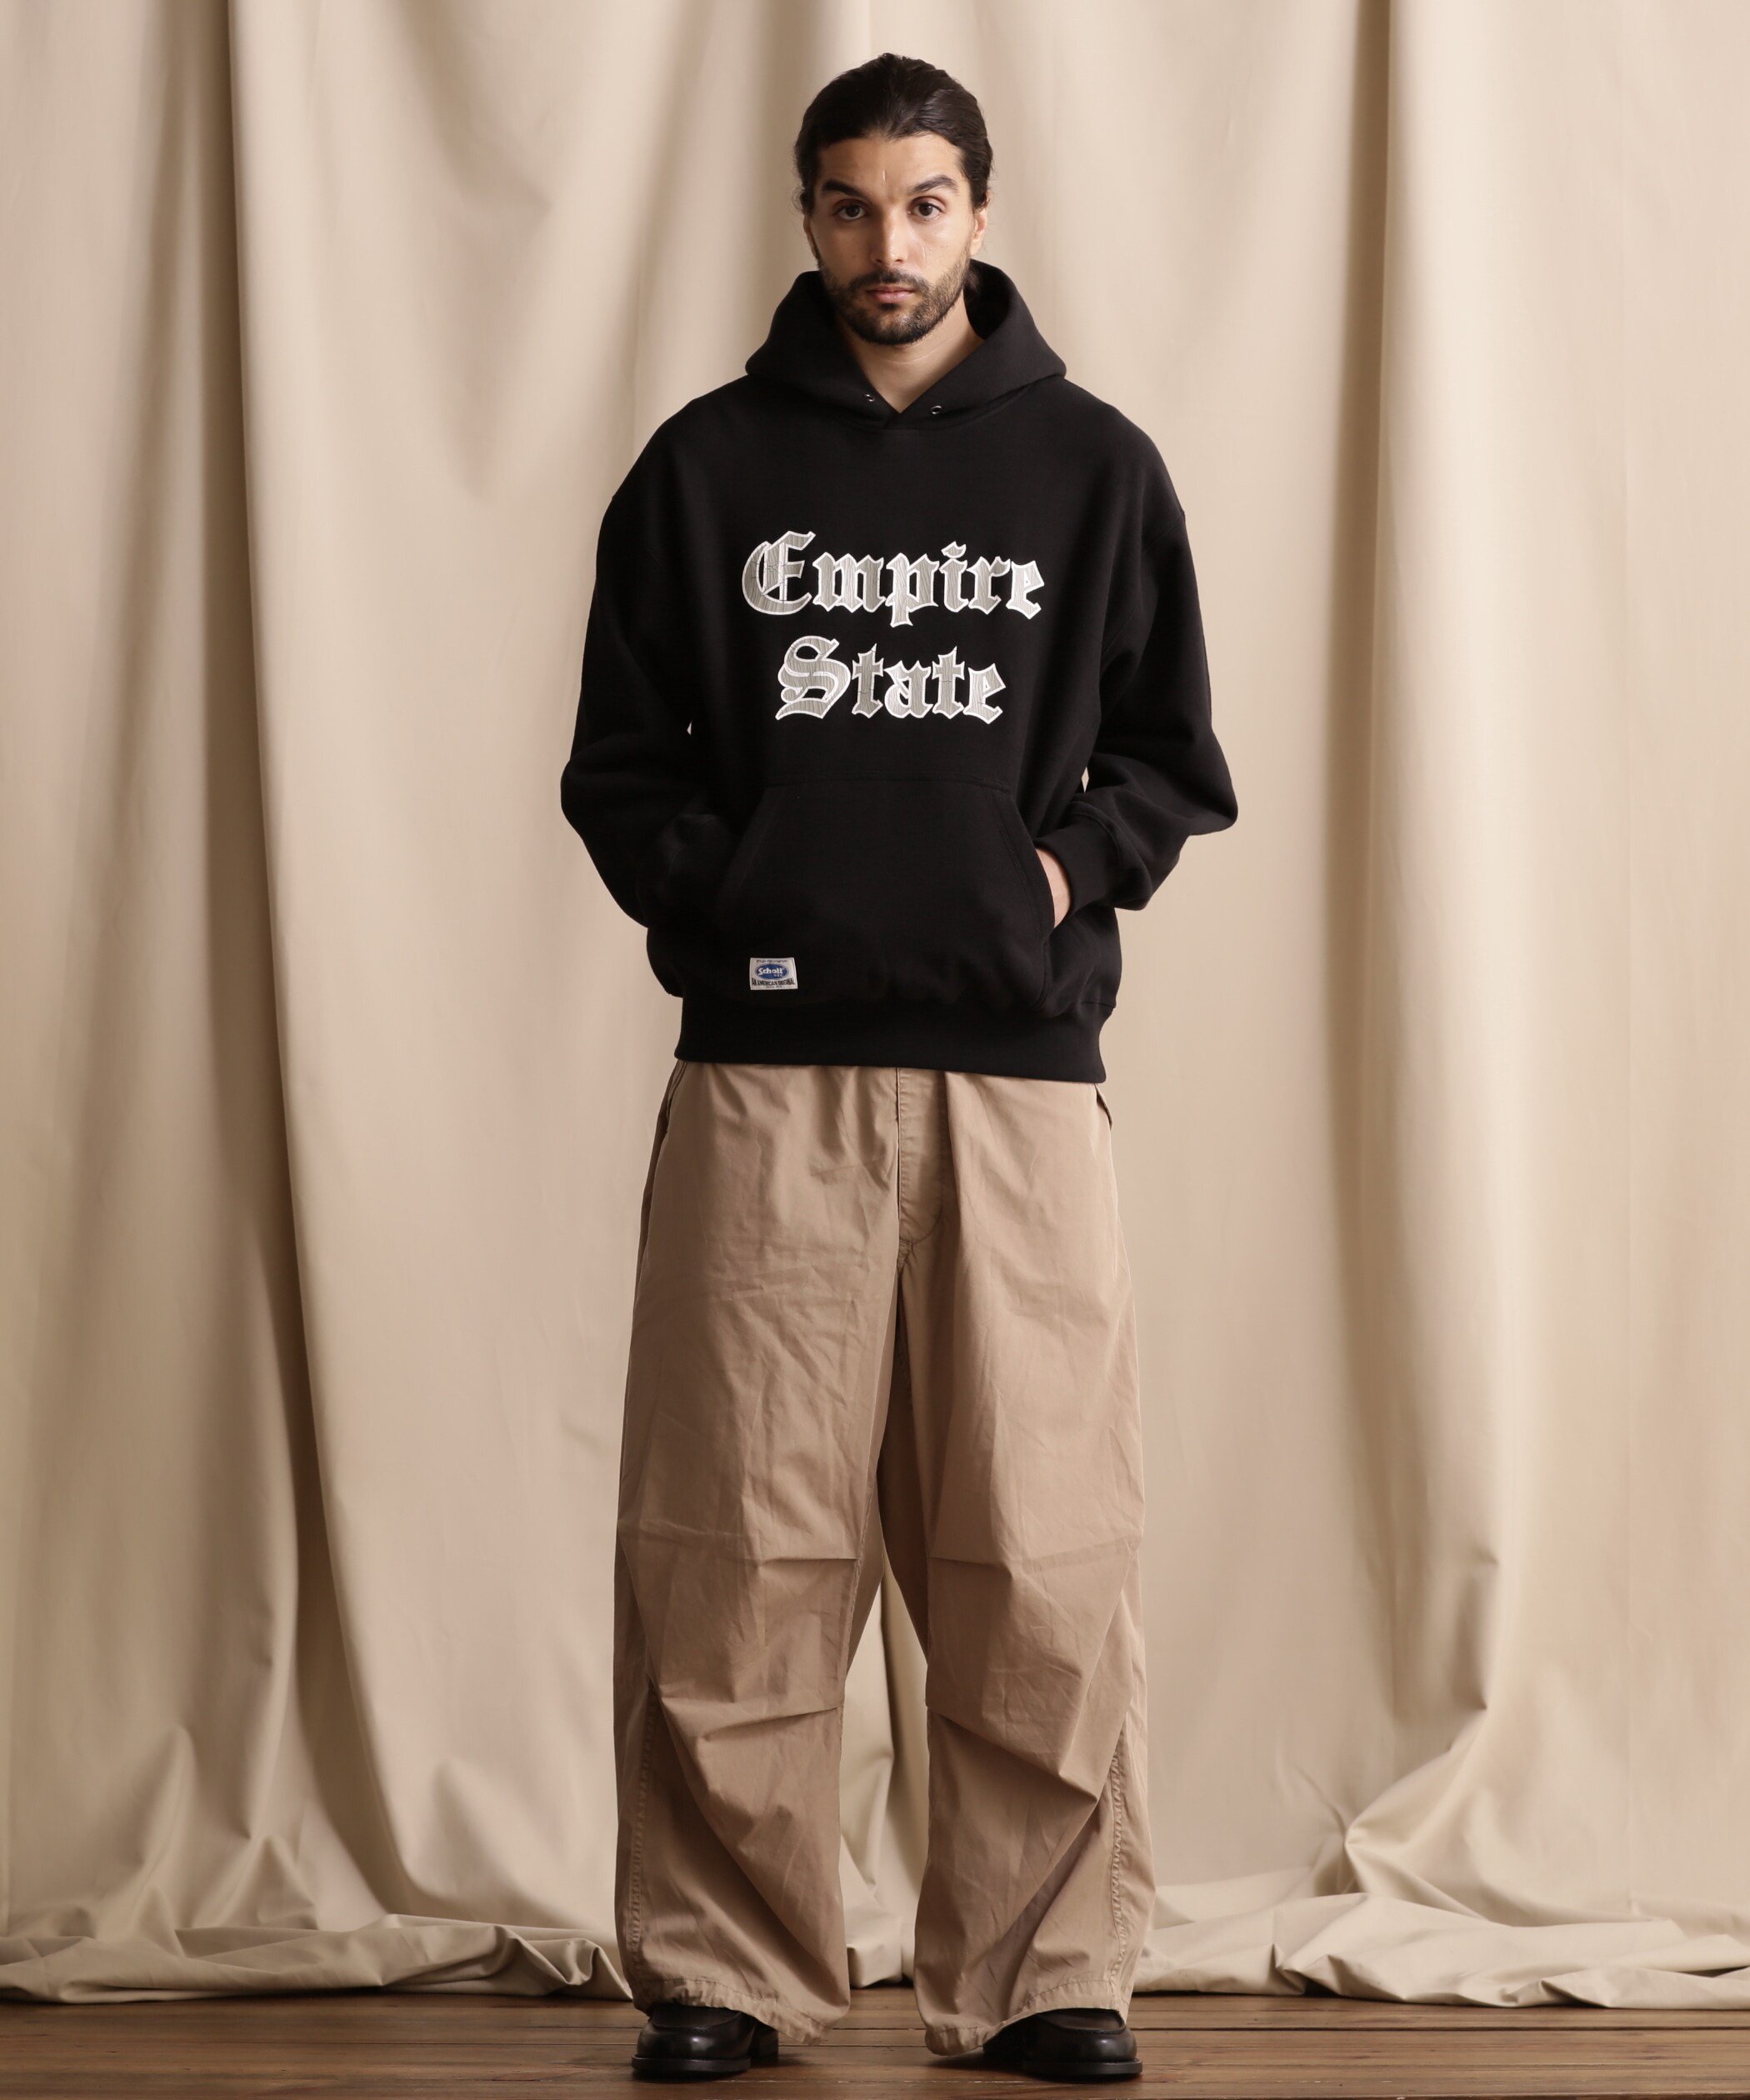 Schott｜WEB LIMITED/HOODED SWEAT EMPIRE STATE/エンパイアステイト